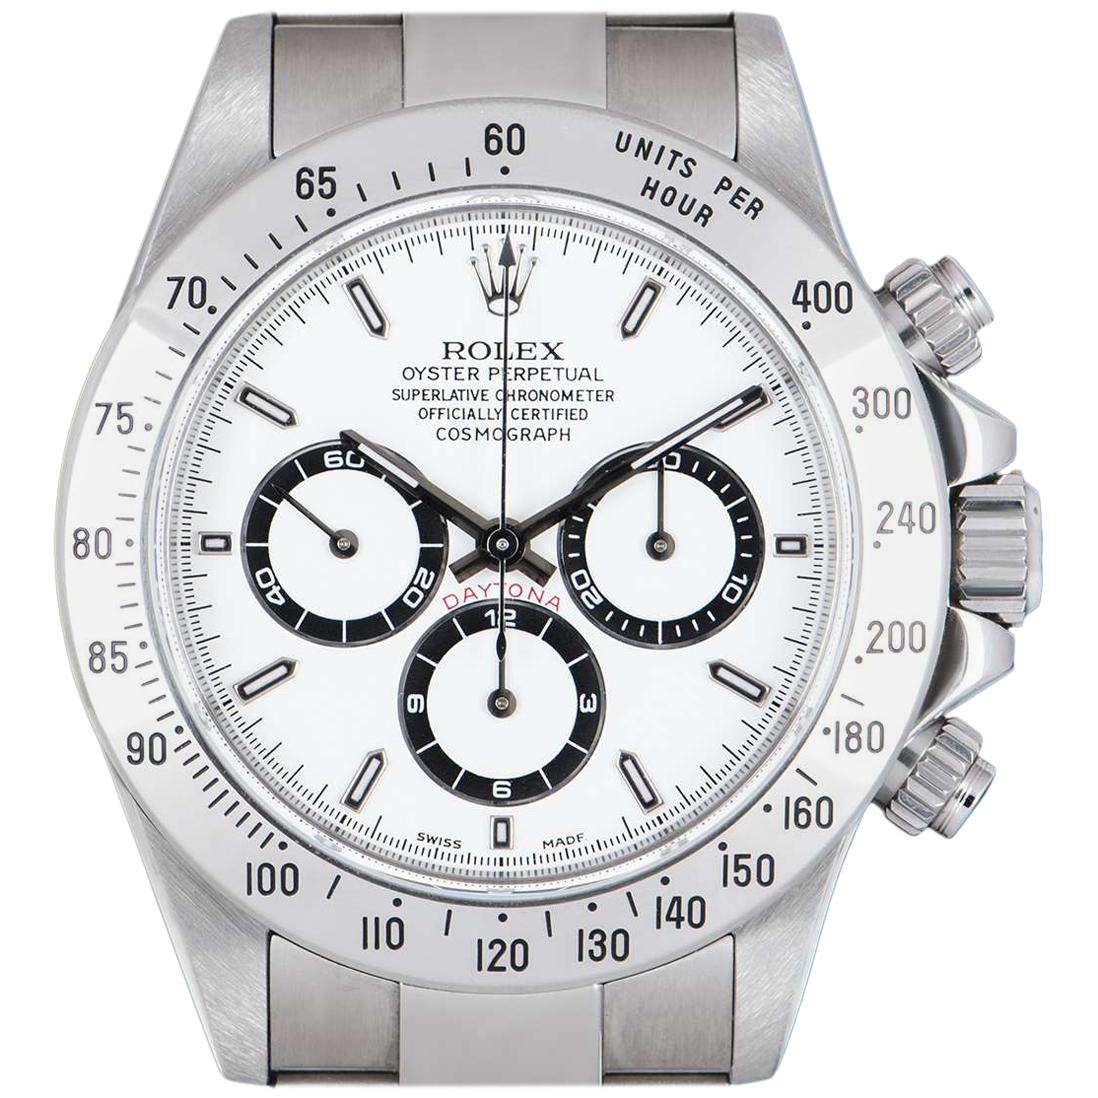 Rolex Daytona Stainless Steel Zenith Movement White Dial Automatic Watch